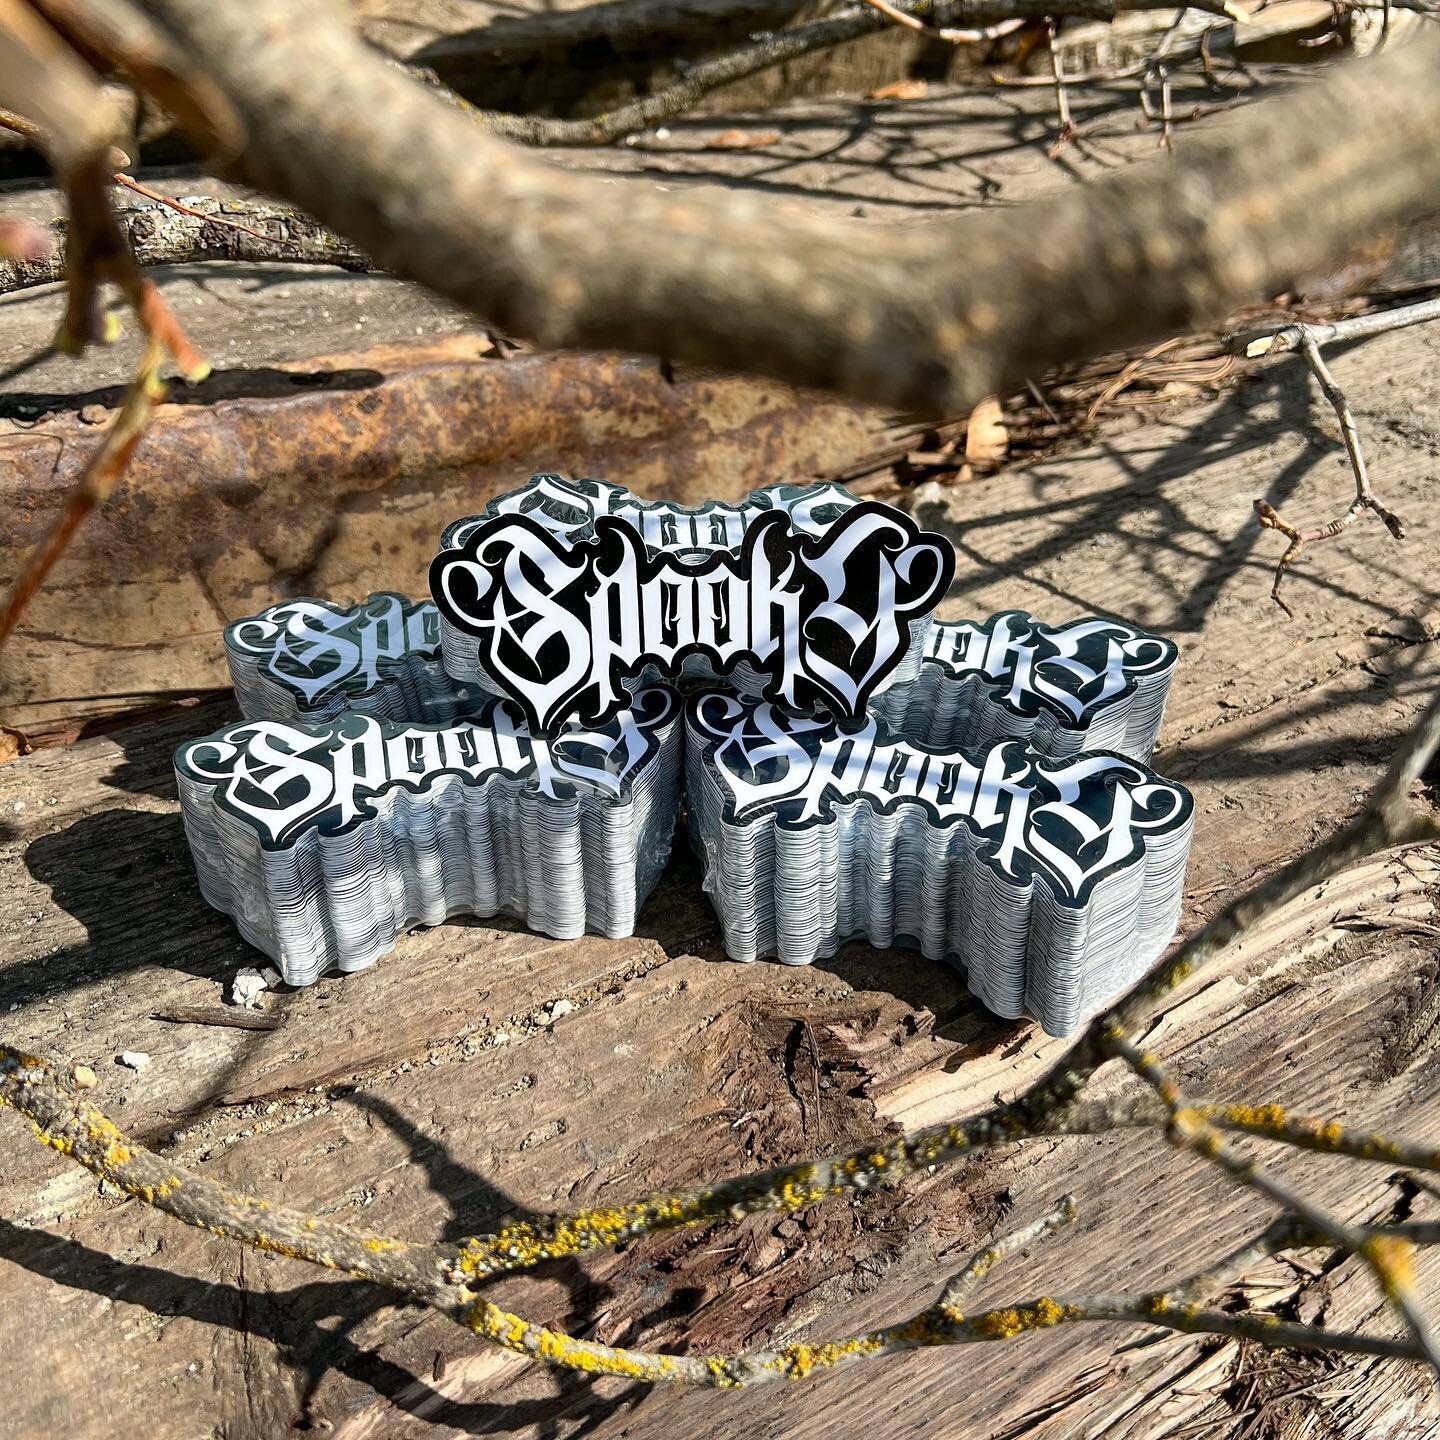 The homies in @thespookyband are hitting the road w/ @blvcktracks and I just wrapped up this grip of new stickers for them. Make sure to hit one of the dates and grab some of this merch they&rsquo;re bringing along. ⁣
⁣
&bull; &bull;&nbsp; &bull;🐀 x